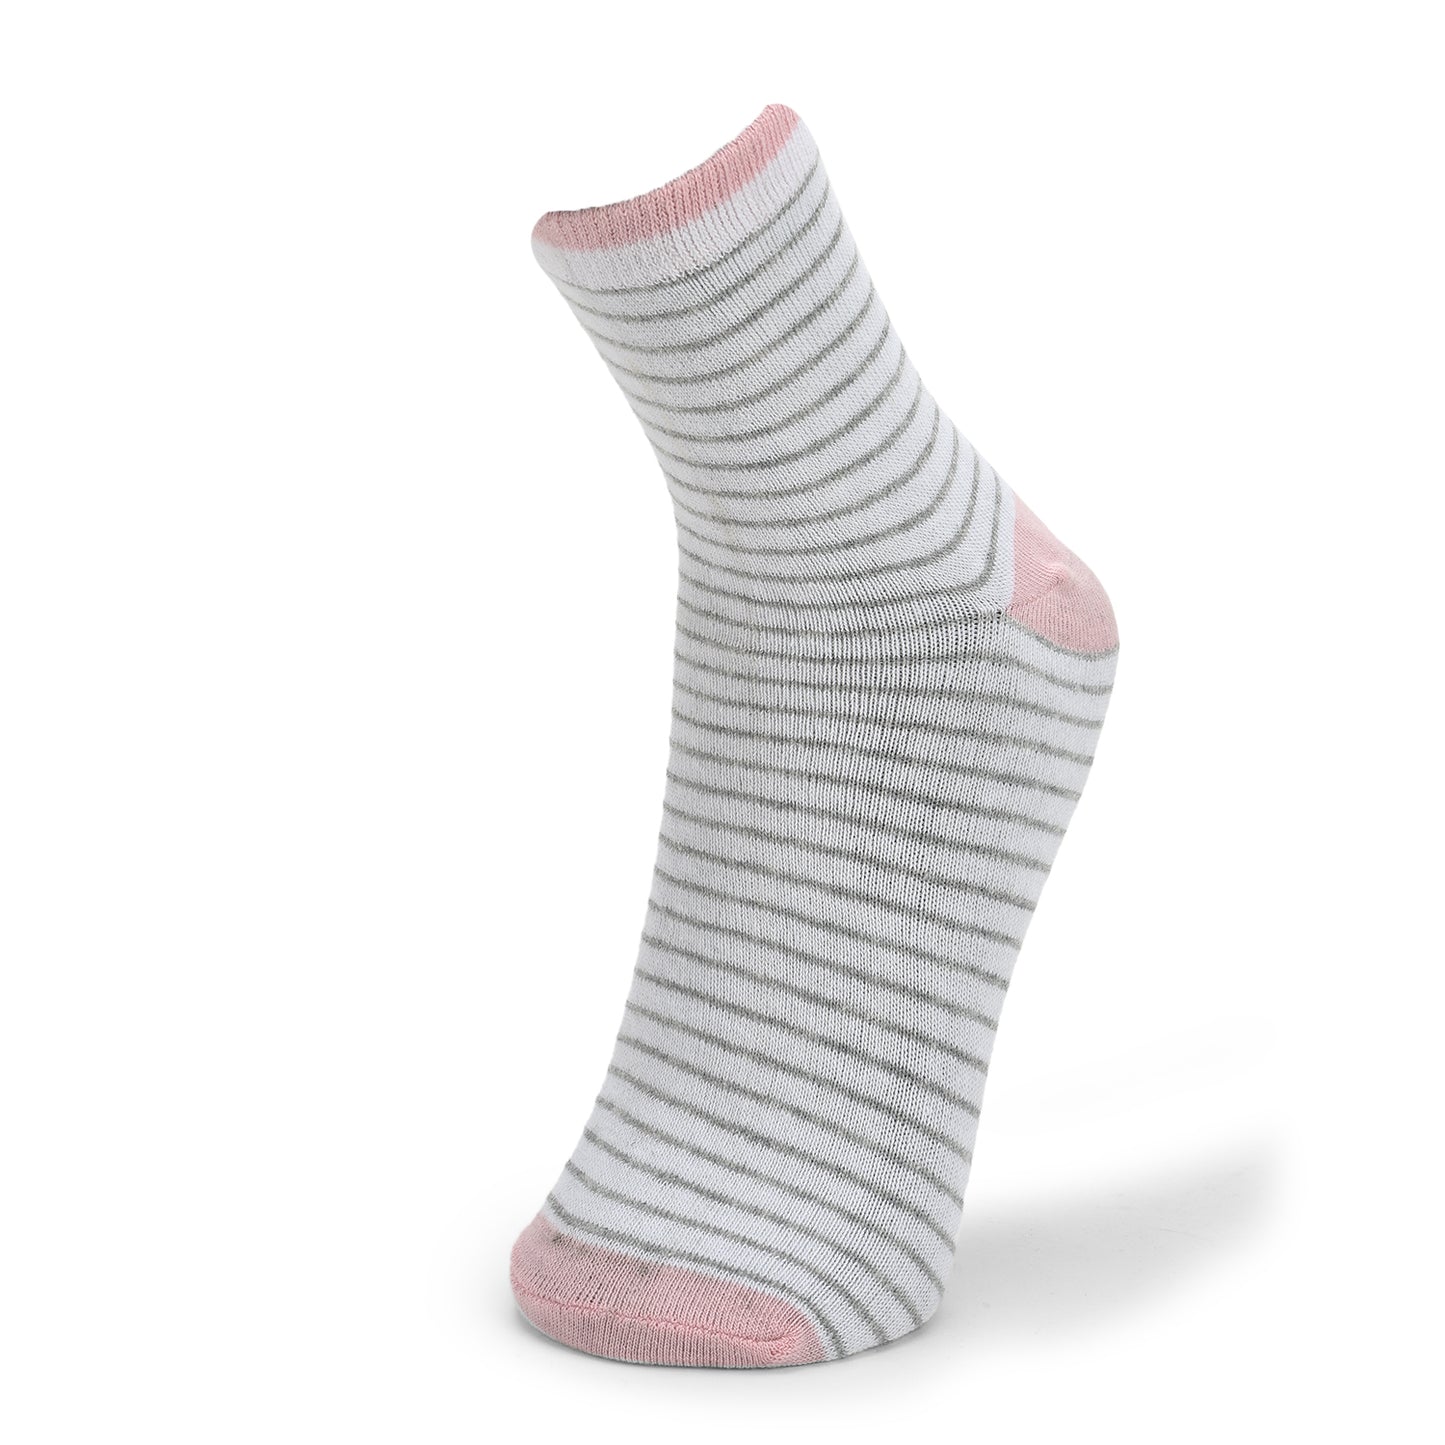 Women's Ankle Socks Stripes Designs-Pack of 3 pairs